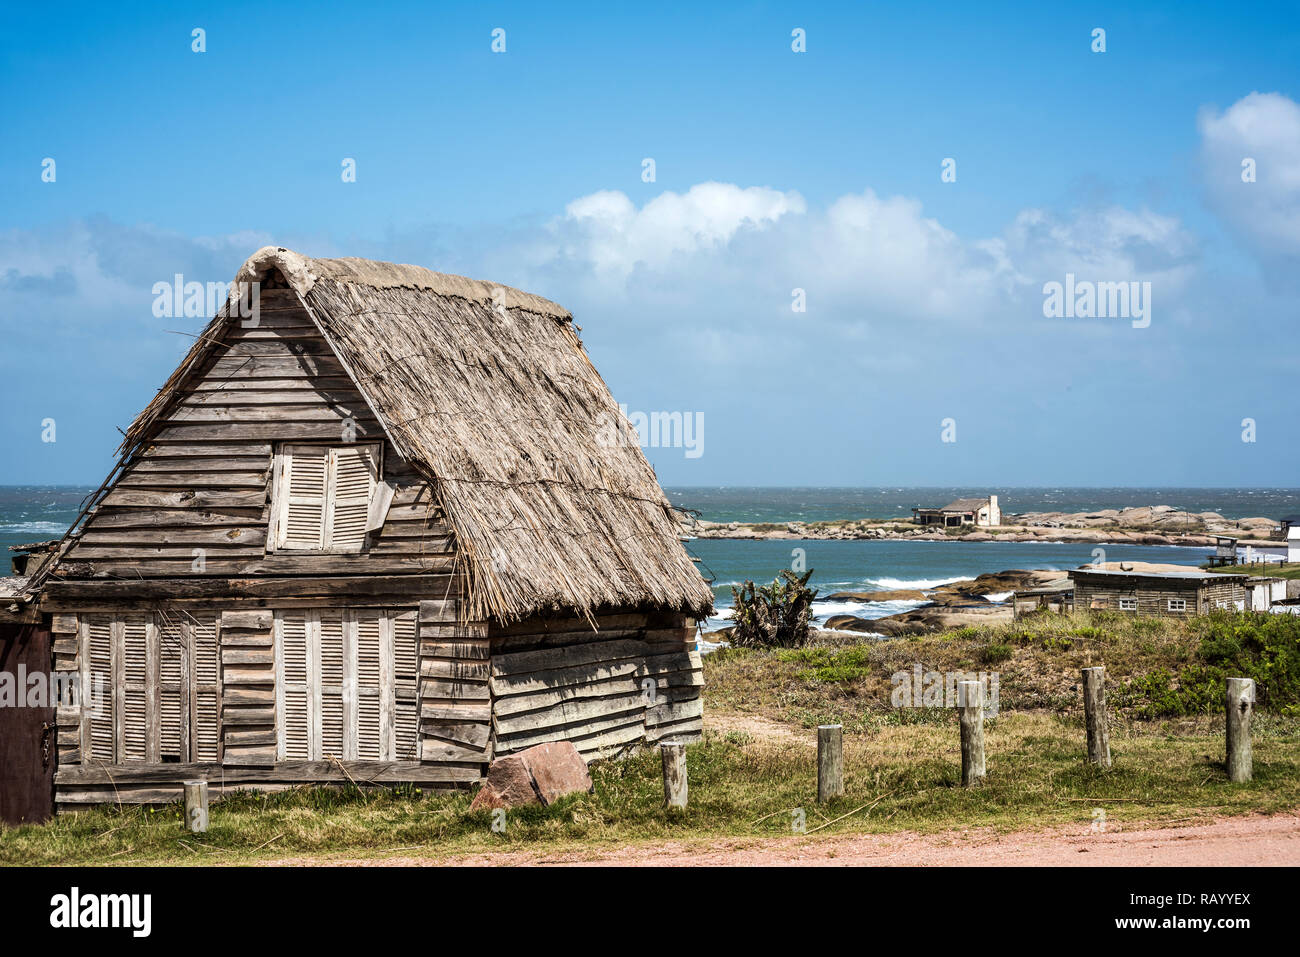 Abandoned home on the Punta del Diablo Beach, popular tourist site and Fisherman's place in the Uruguay Coast Stock Photo